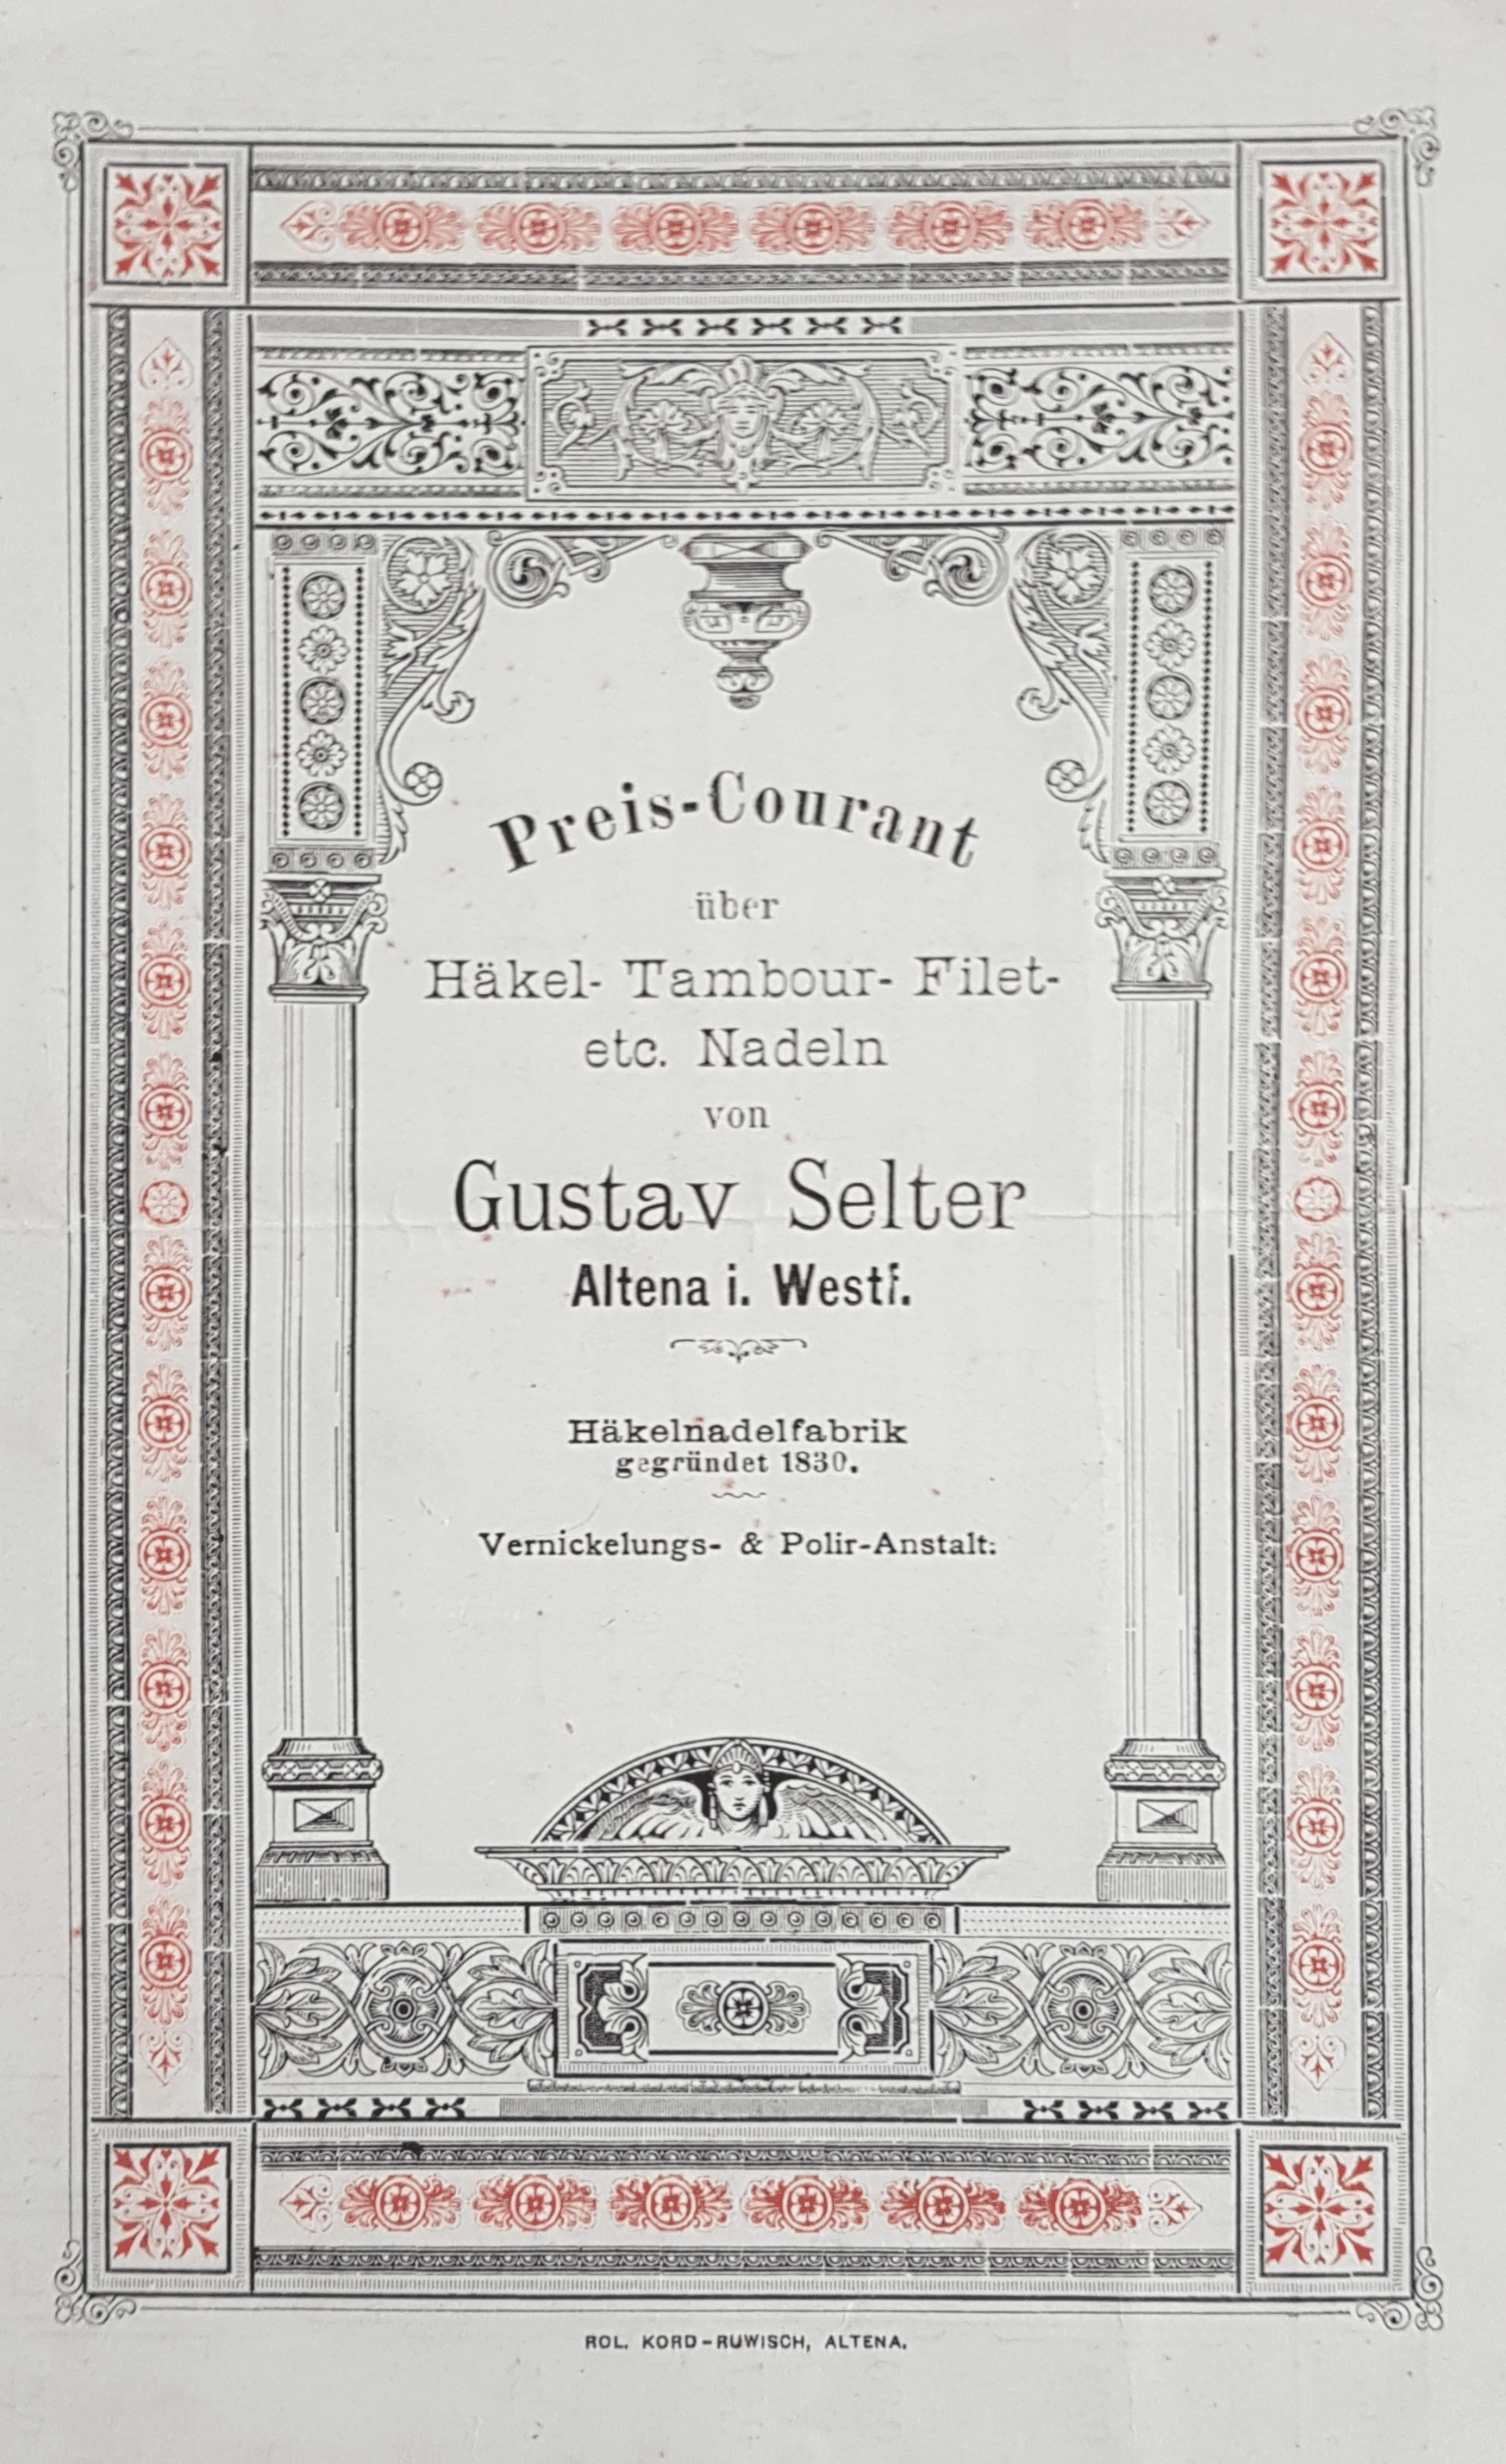 Assortment of the Gustav Selter company at the beginning of the 20th century